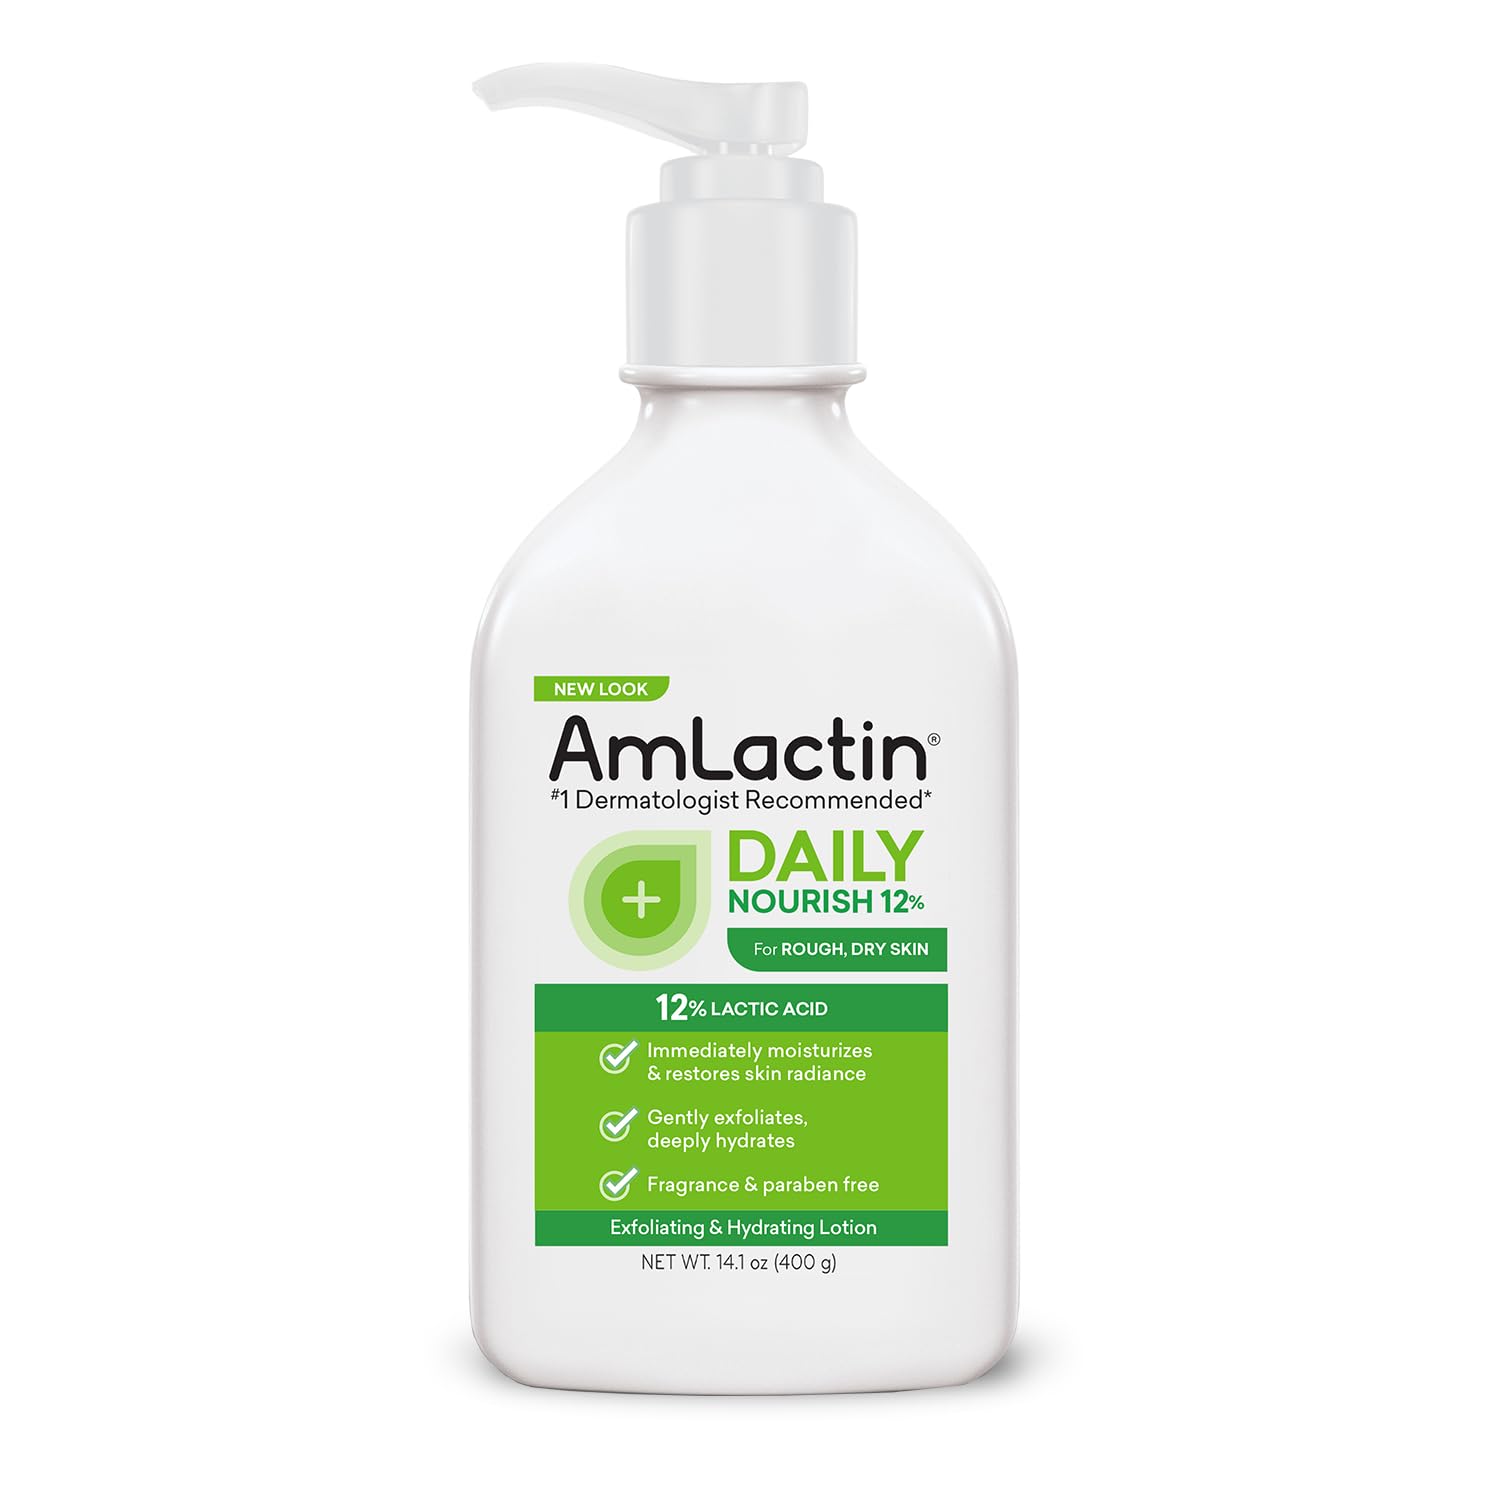 AmLactin Daily Nourish 12% - 14.1 oz Body Lotion with 12% Lactic Acid - Exfoliator and Moisturizer for Dry Skin (Packaging May Vary)?